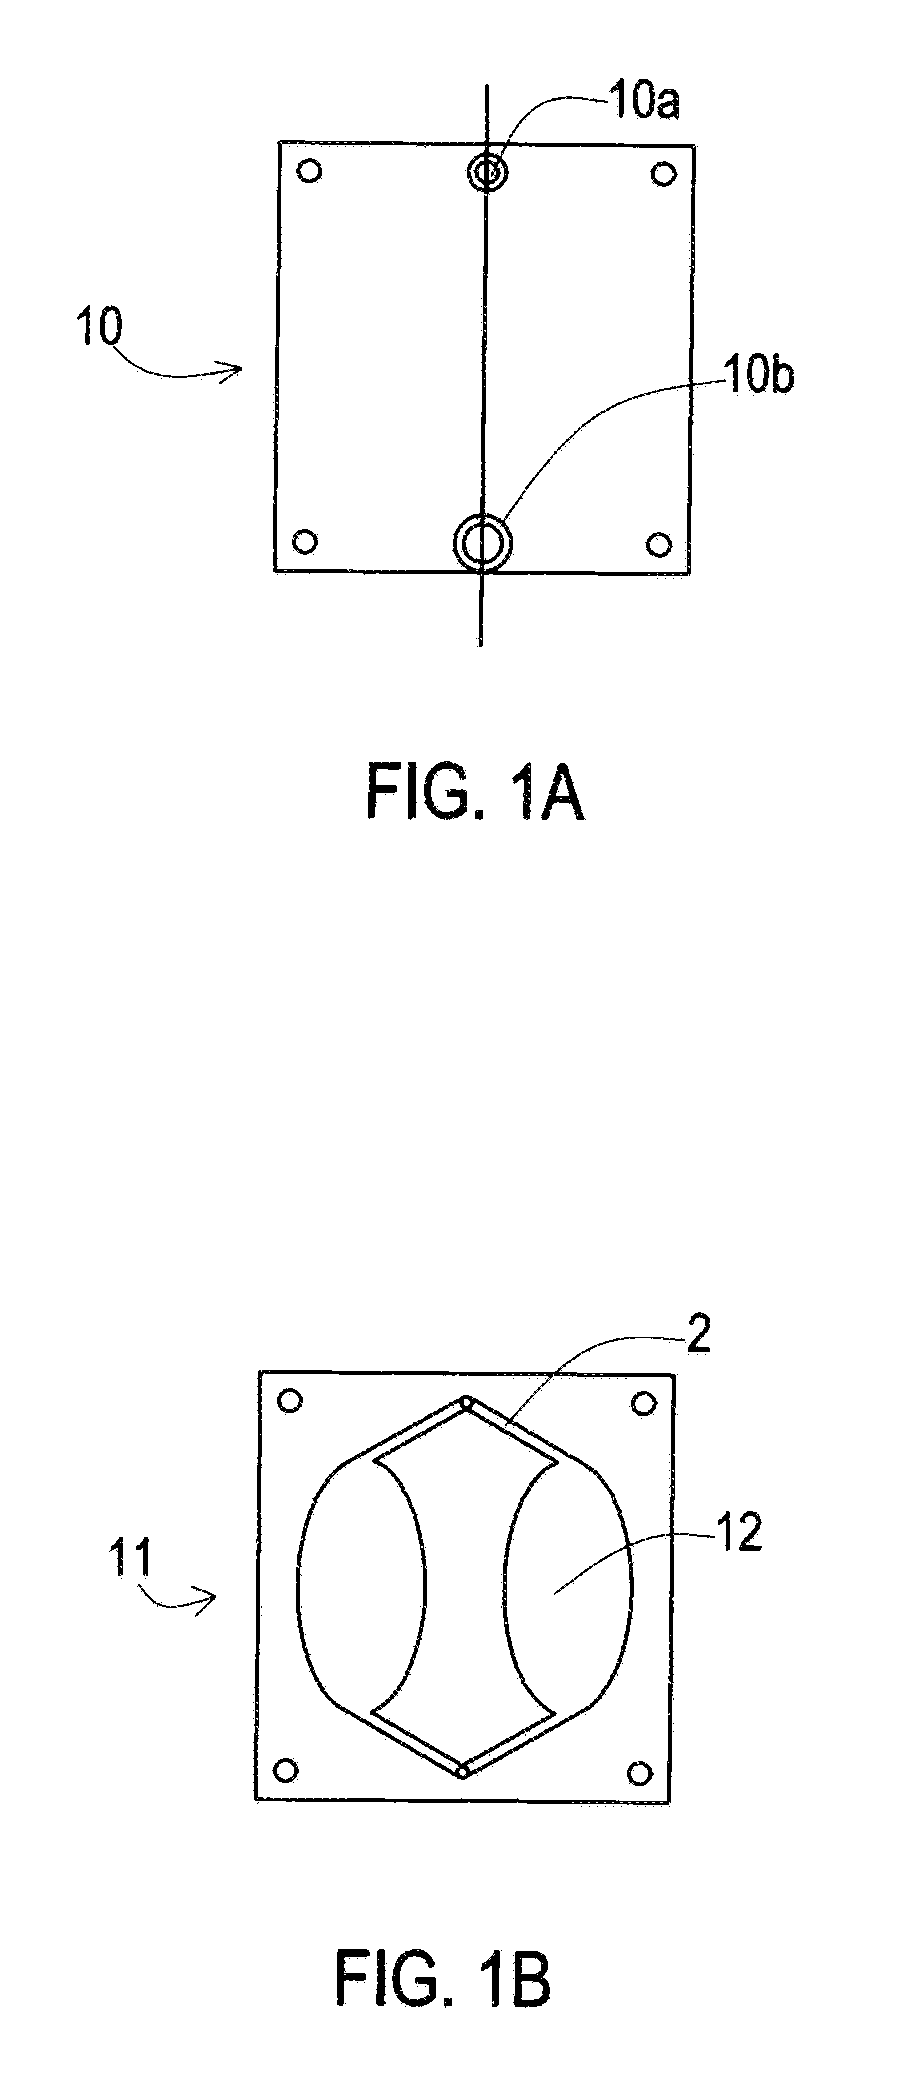 Interconnecting Microfluidic Package, Fabrication Method and Methods of Use